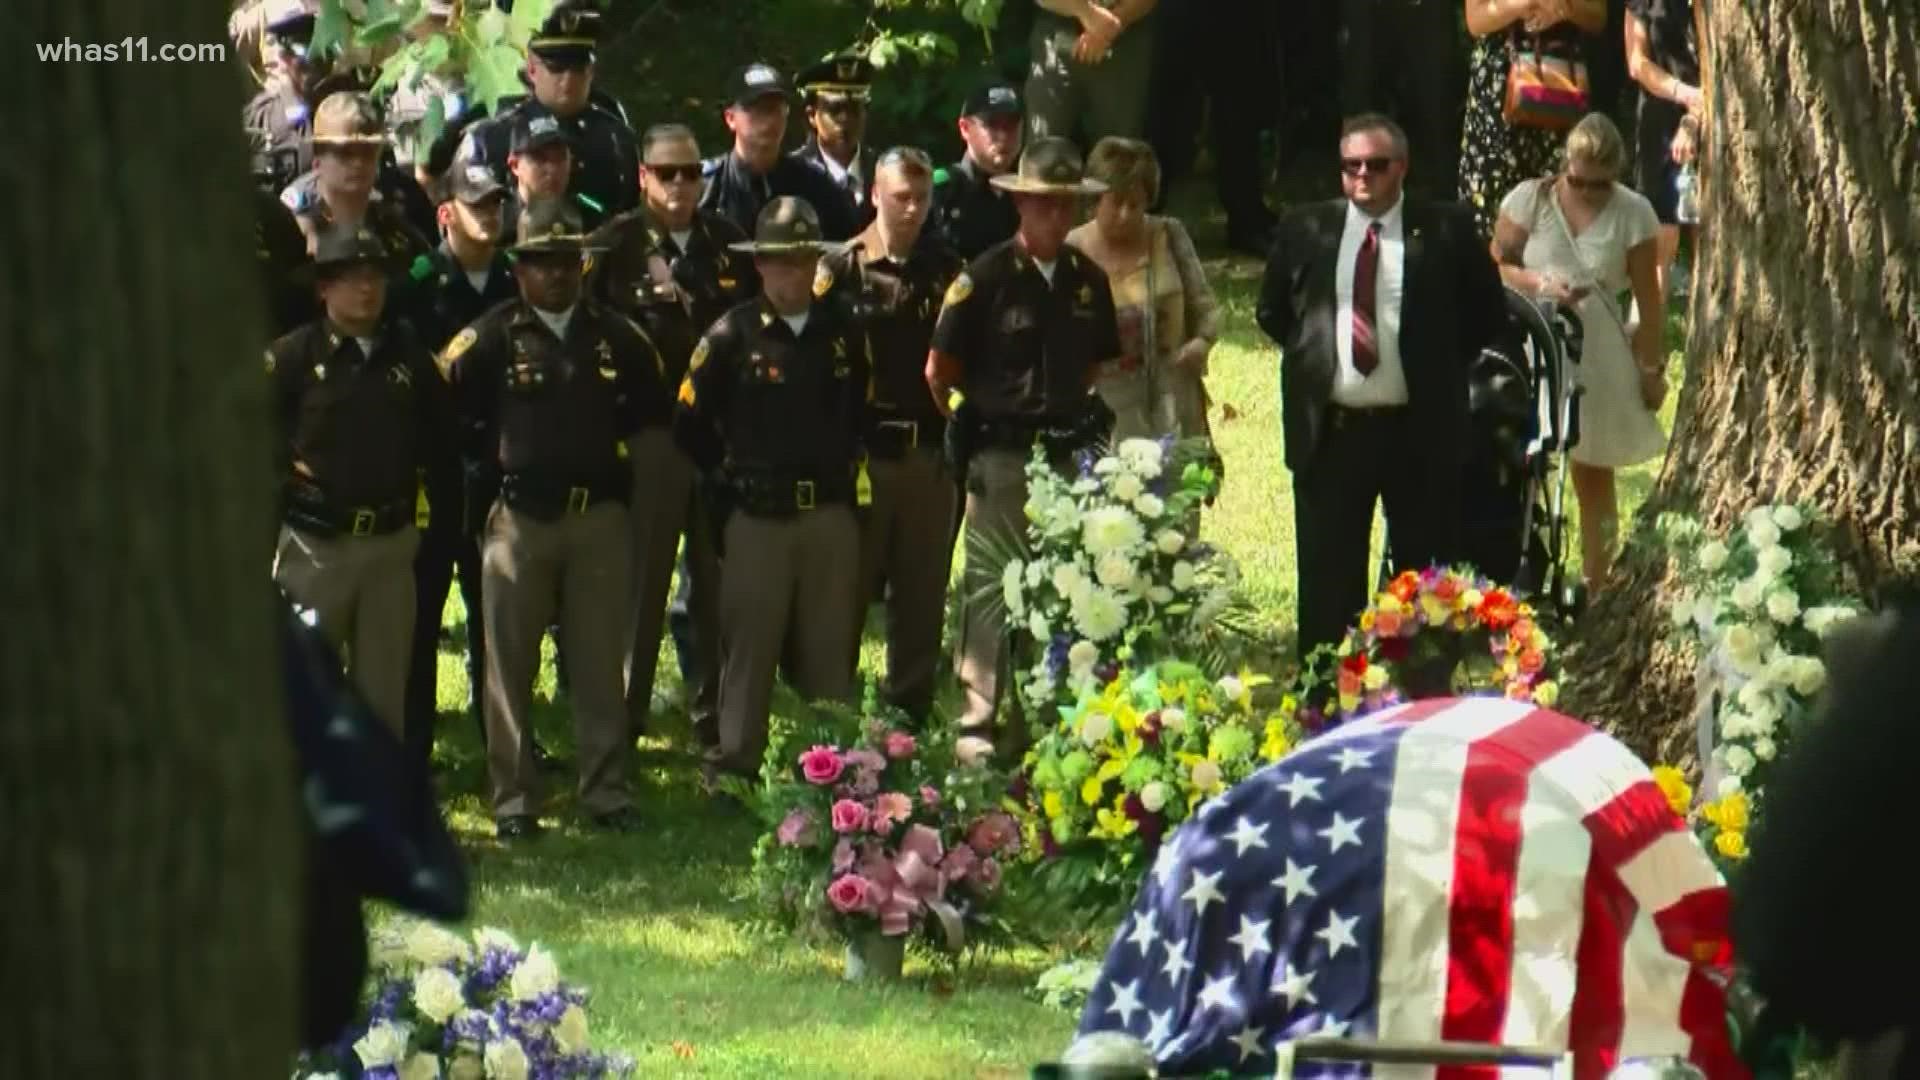 Deputy Shirley's family and friends, along with multiple law enforcement agencies and community members, gathered to honor the fallen deputy as he was laid to rest.